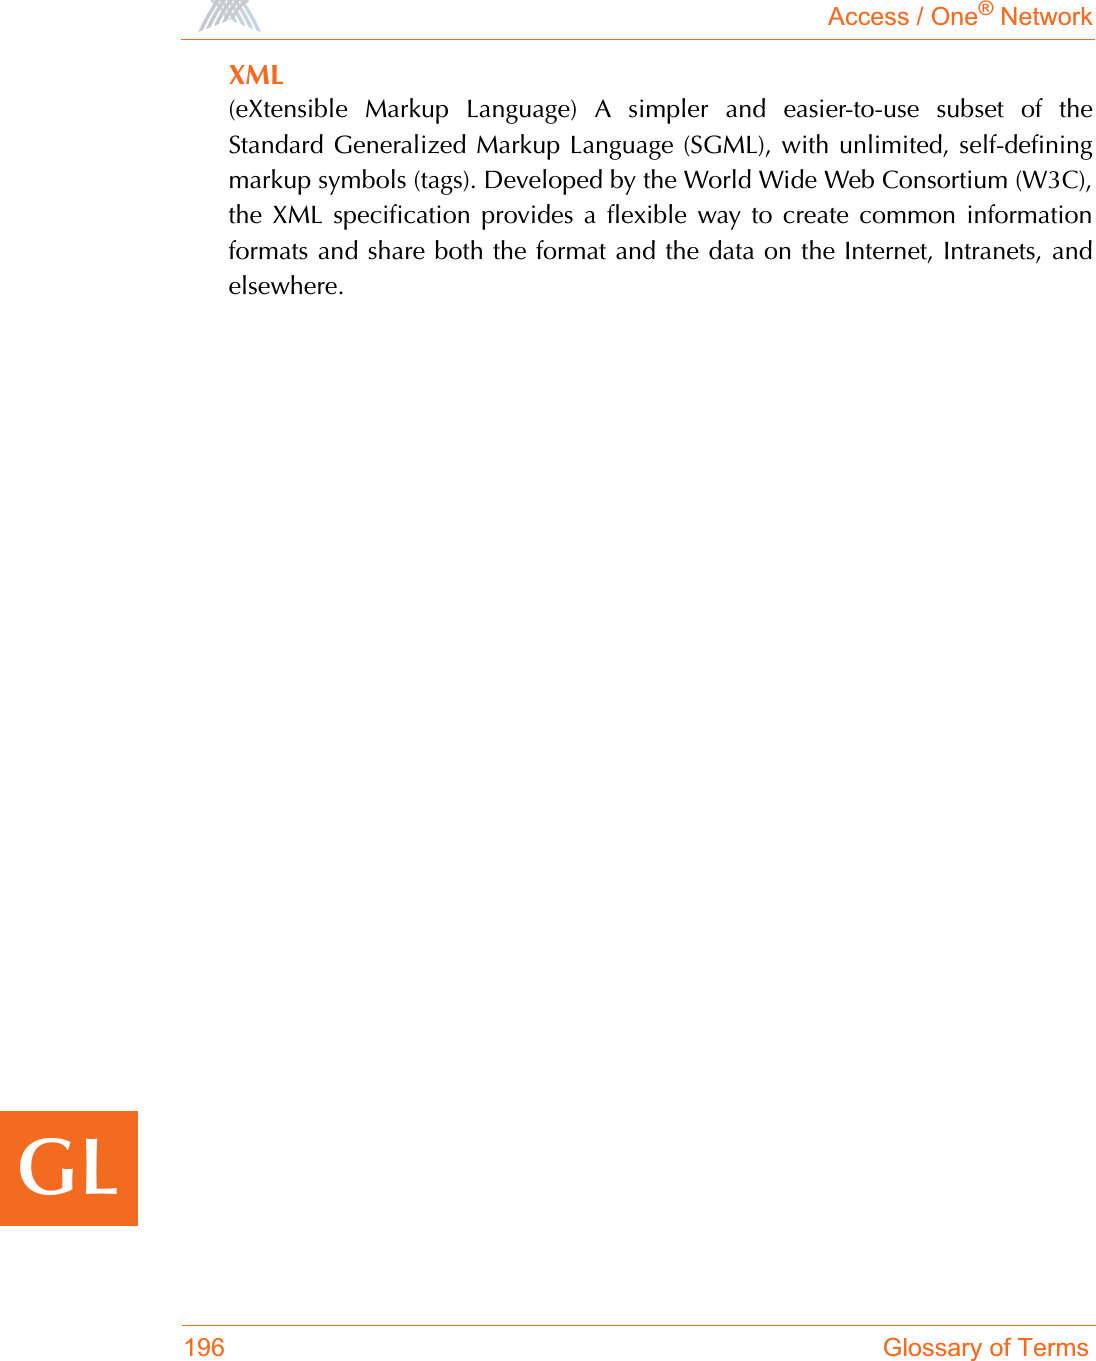 Access / One® Network196 Glossary of TermsGLXML(eXtensible Markup Language) A simpler and easier-to-use subset of theStandard Generalized Markup Language (SGML), with unlimited, self-definingmarkup symbols (tags). Developed by the World Wide Web Consortium (W3C),the XML specification provides a flexible way to create common informationformats and share both the format and the data on the Internet, Intranets, andelsewhere.